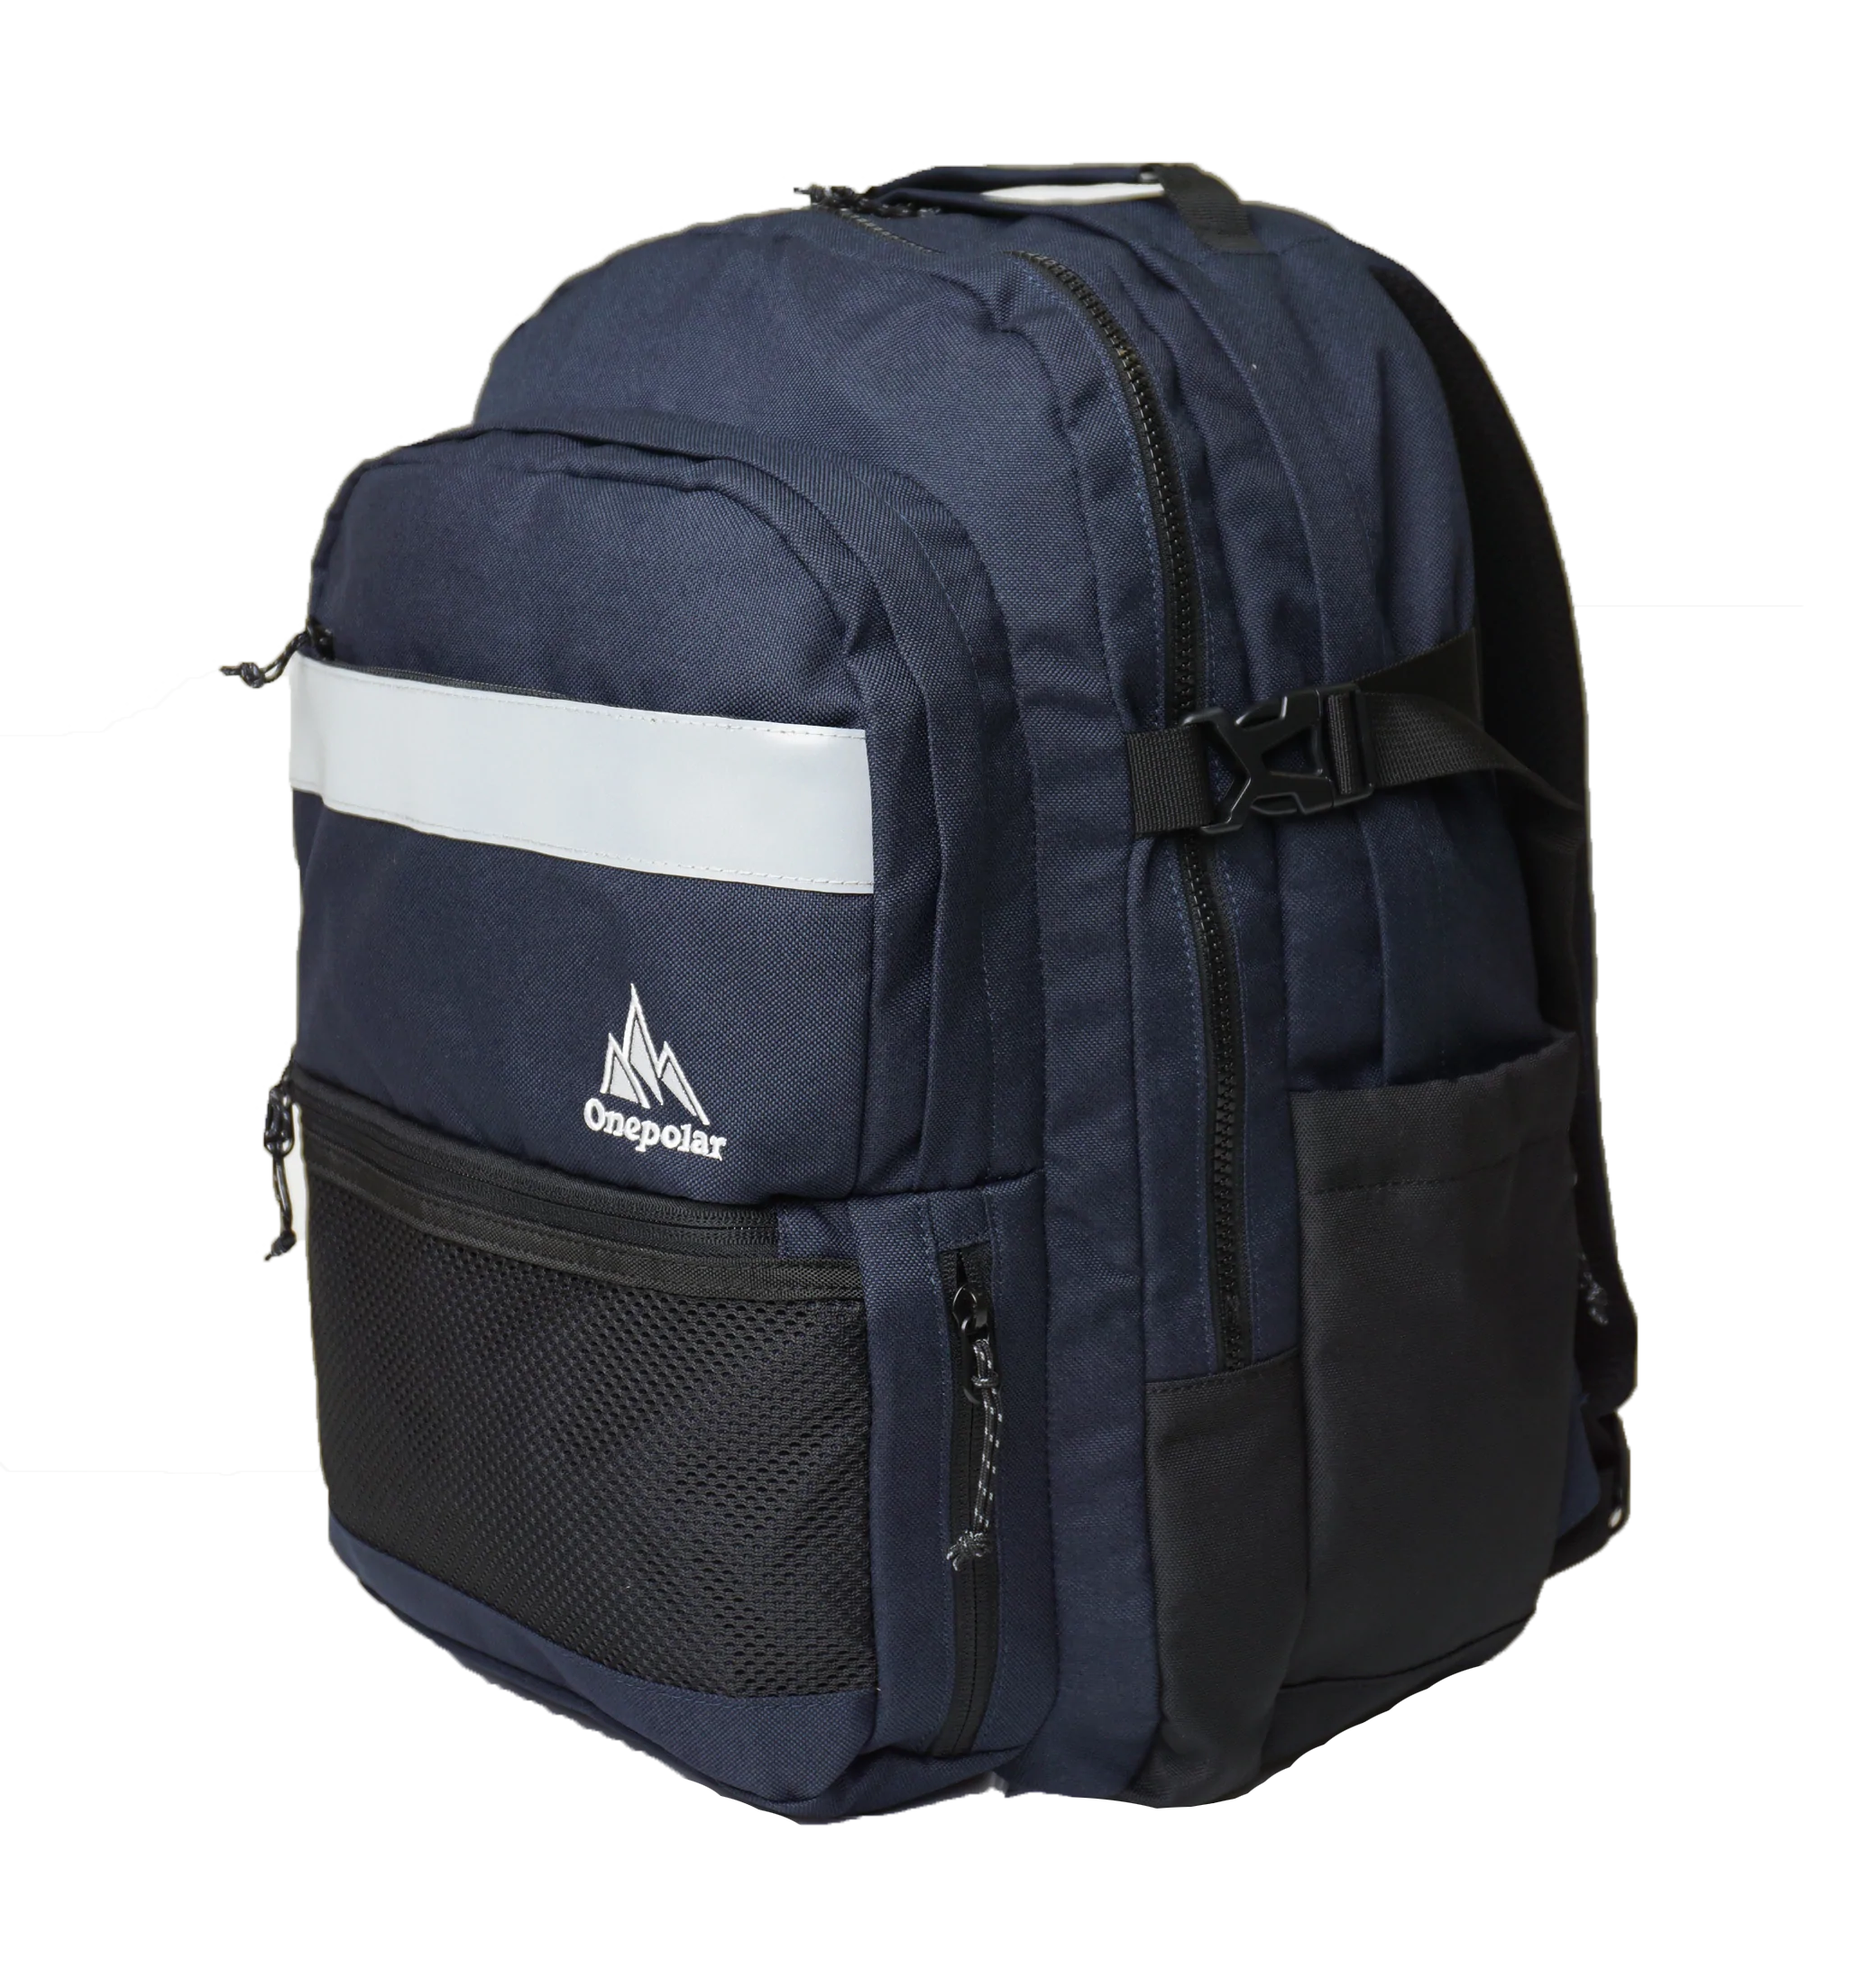 ONE POLAR PL-2620 Ergo Active Spinal Protection Backpack